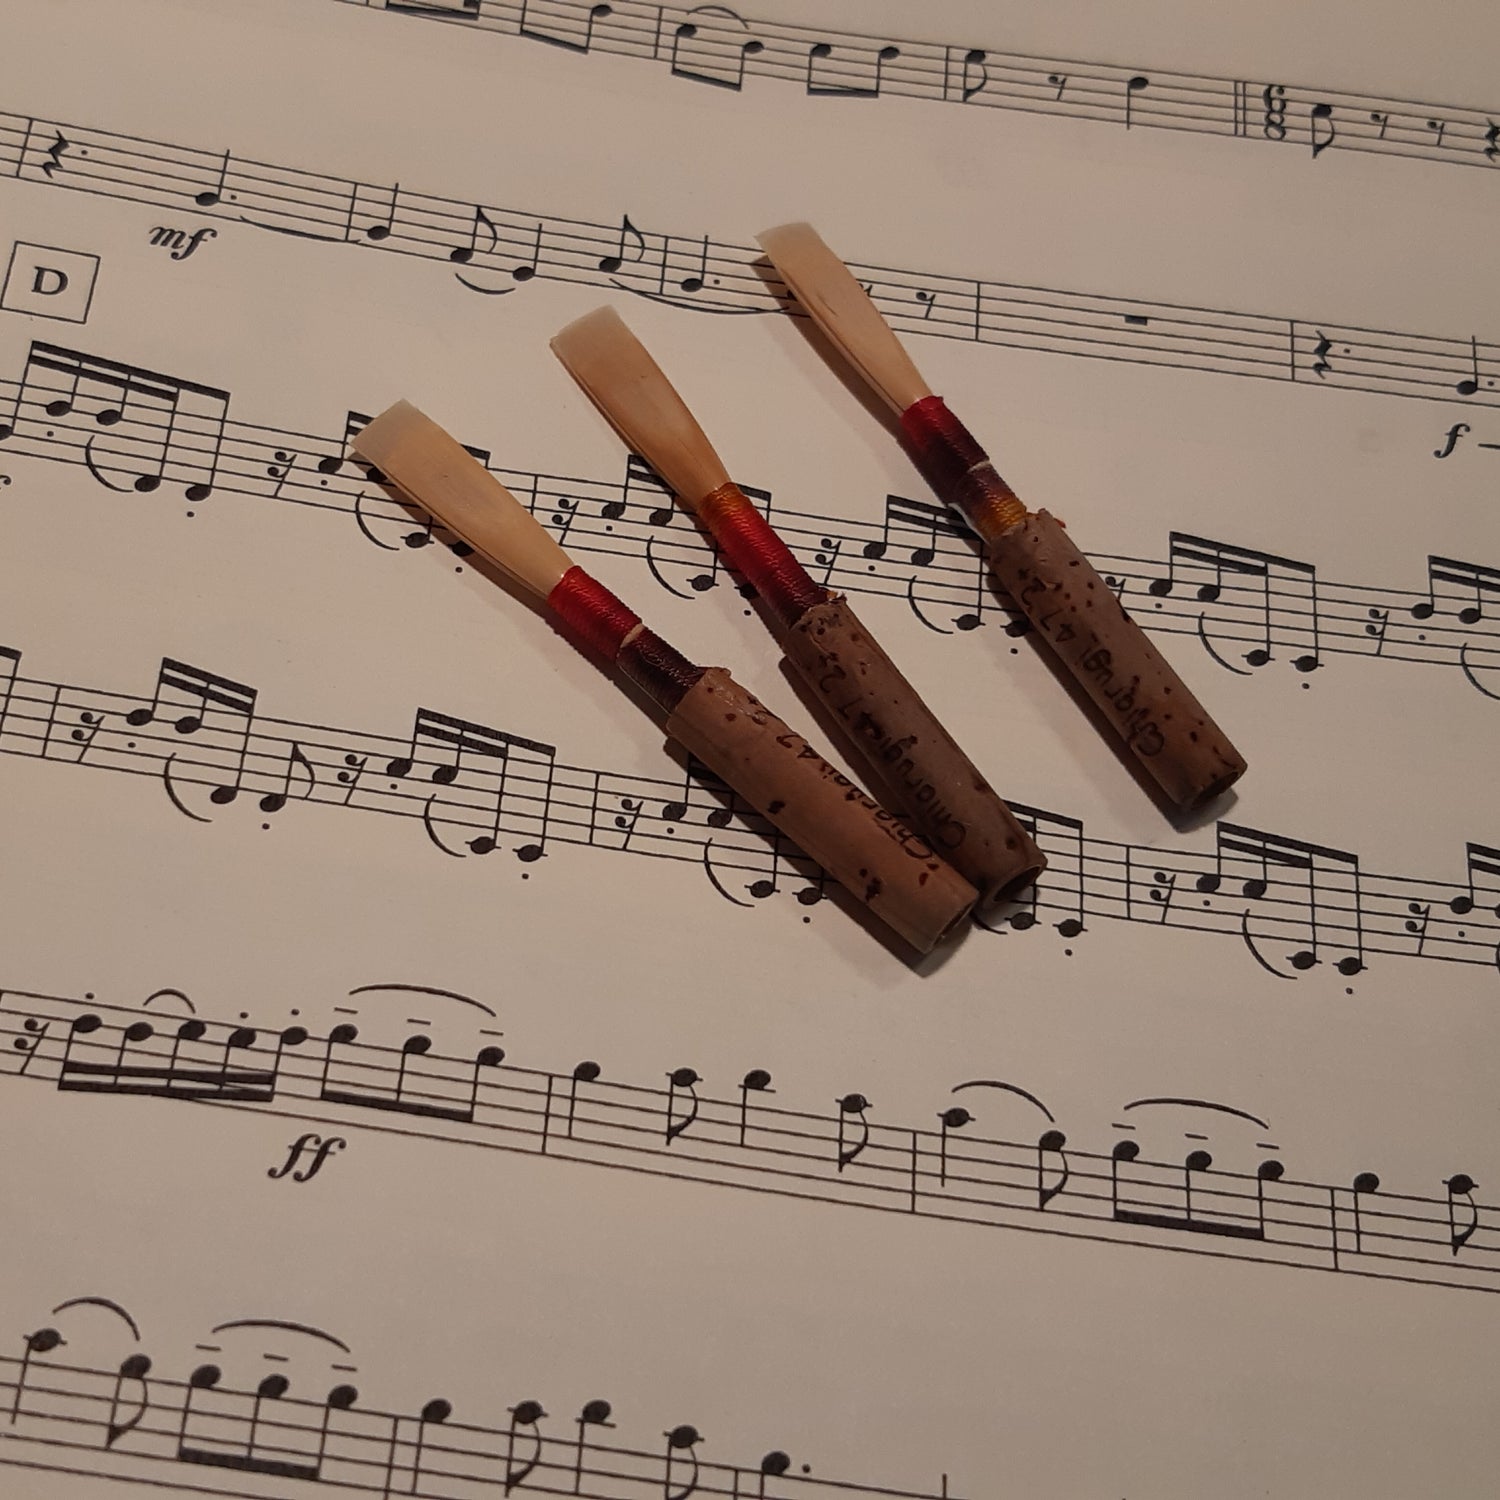 three oboe reeds with sheet music in the background